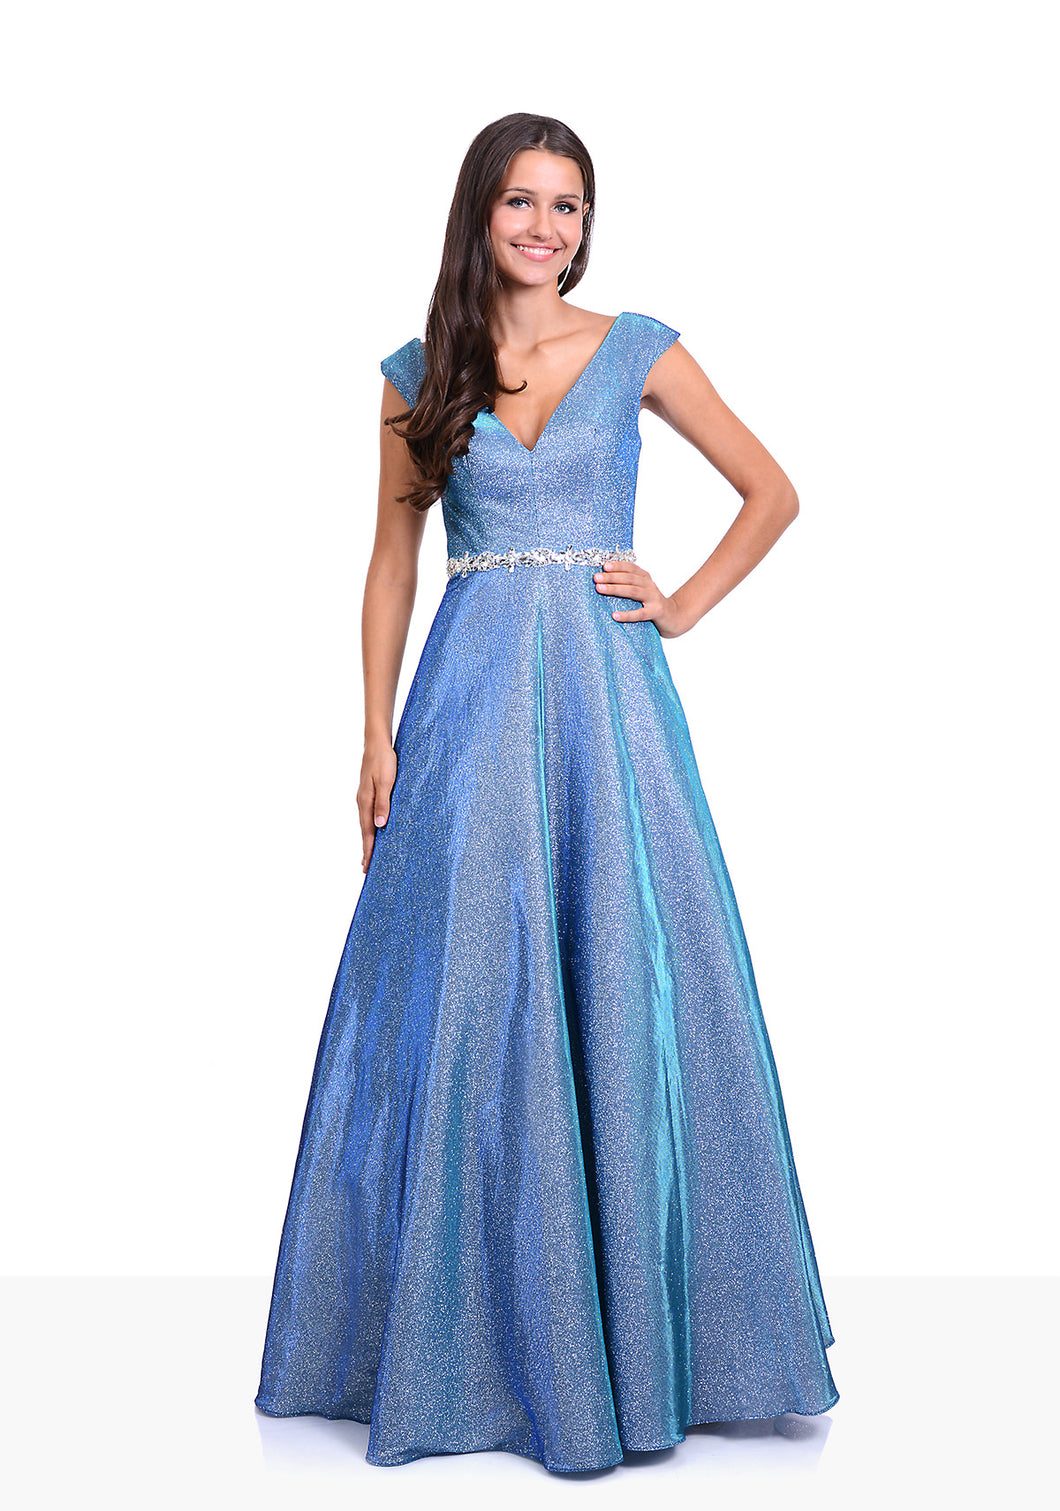 Glitter blue ball gown with diamante waist band. Full skirt glitter dress perfect for prom or an evening gown. 